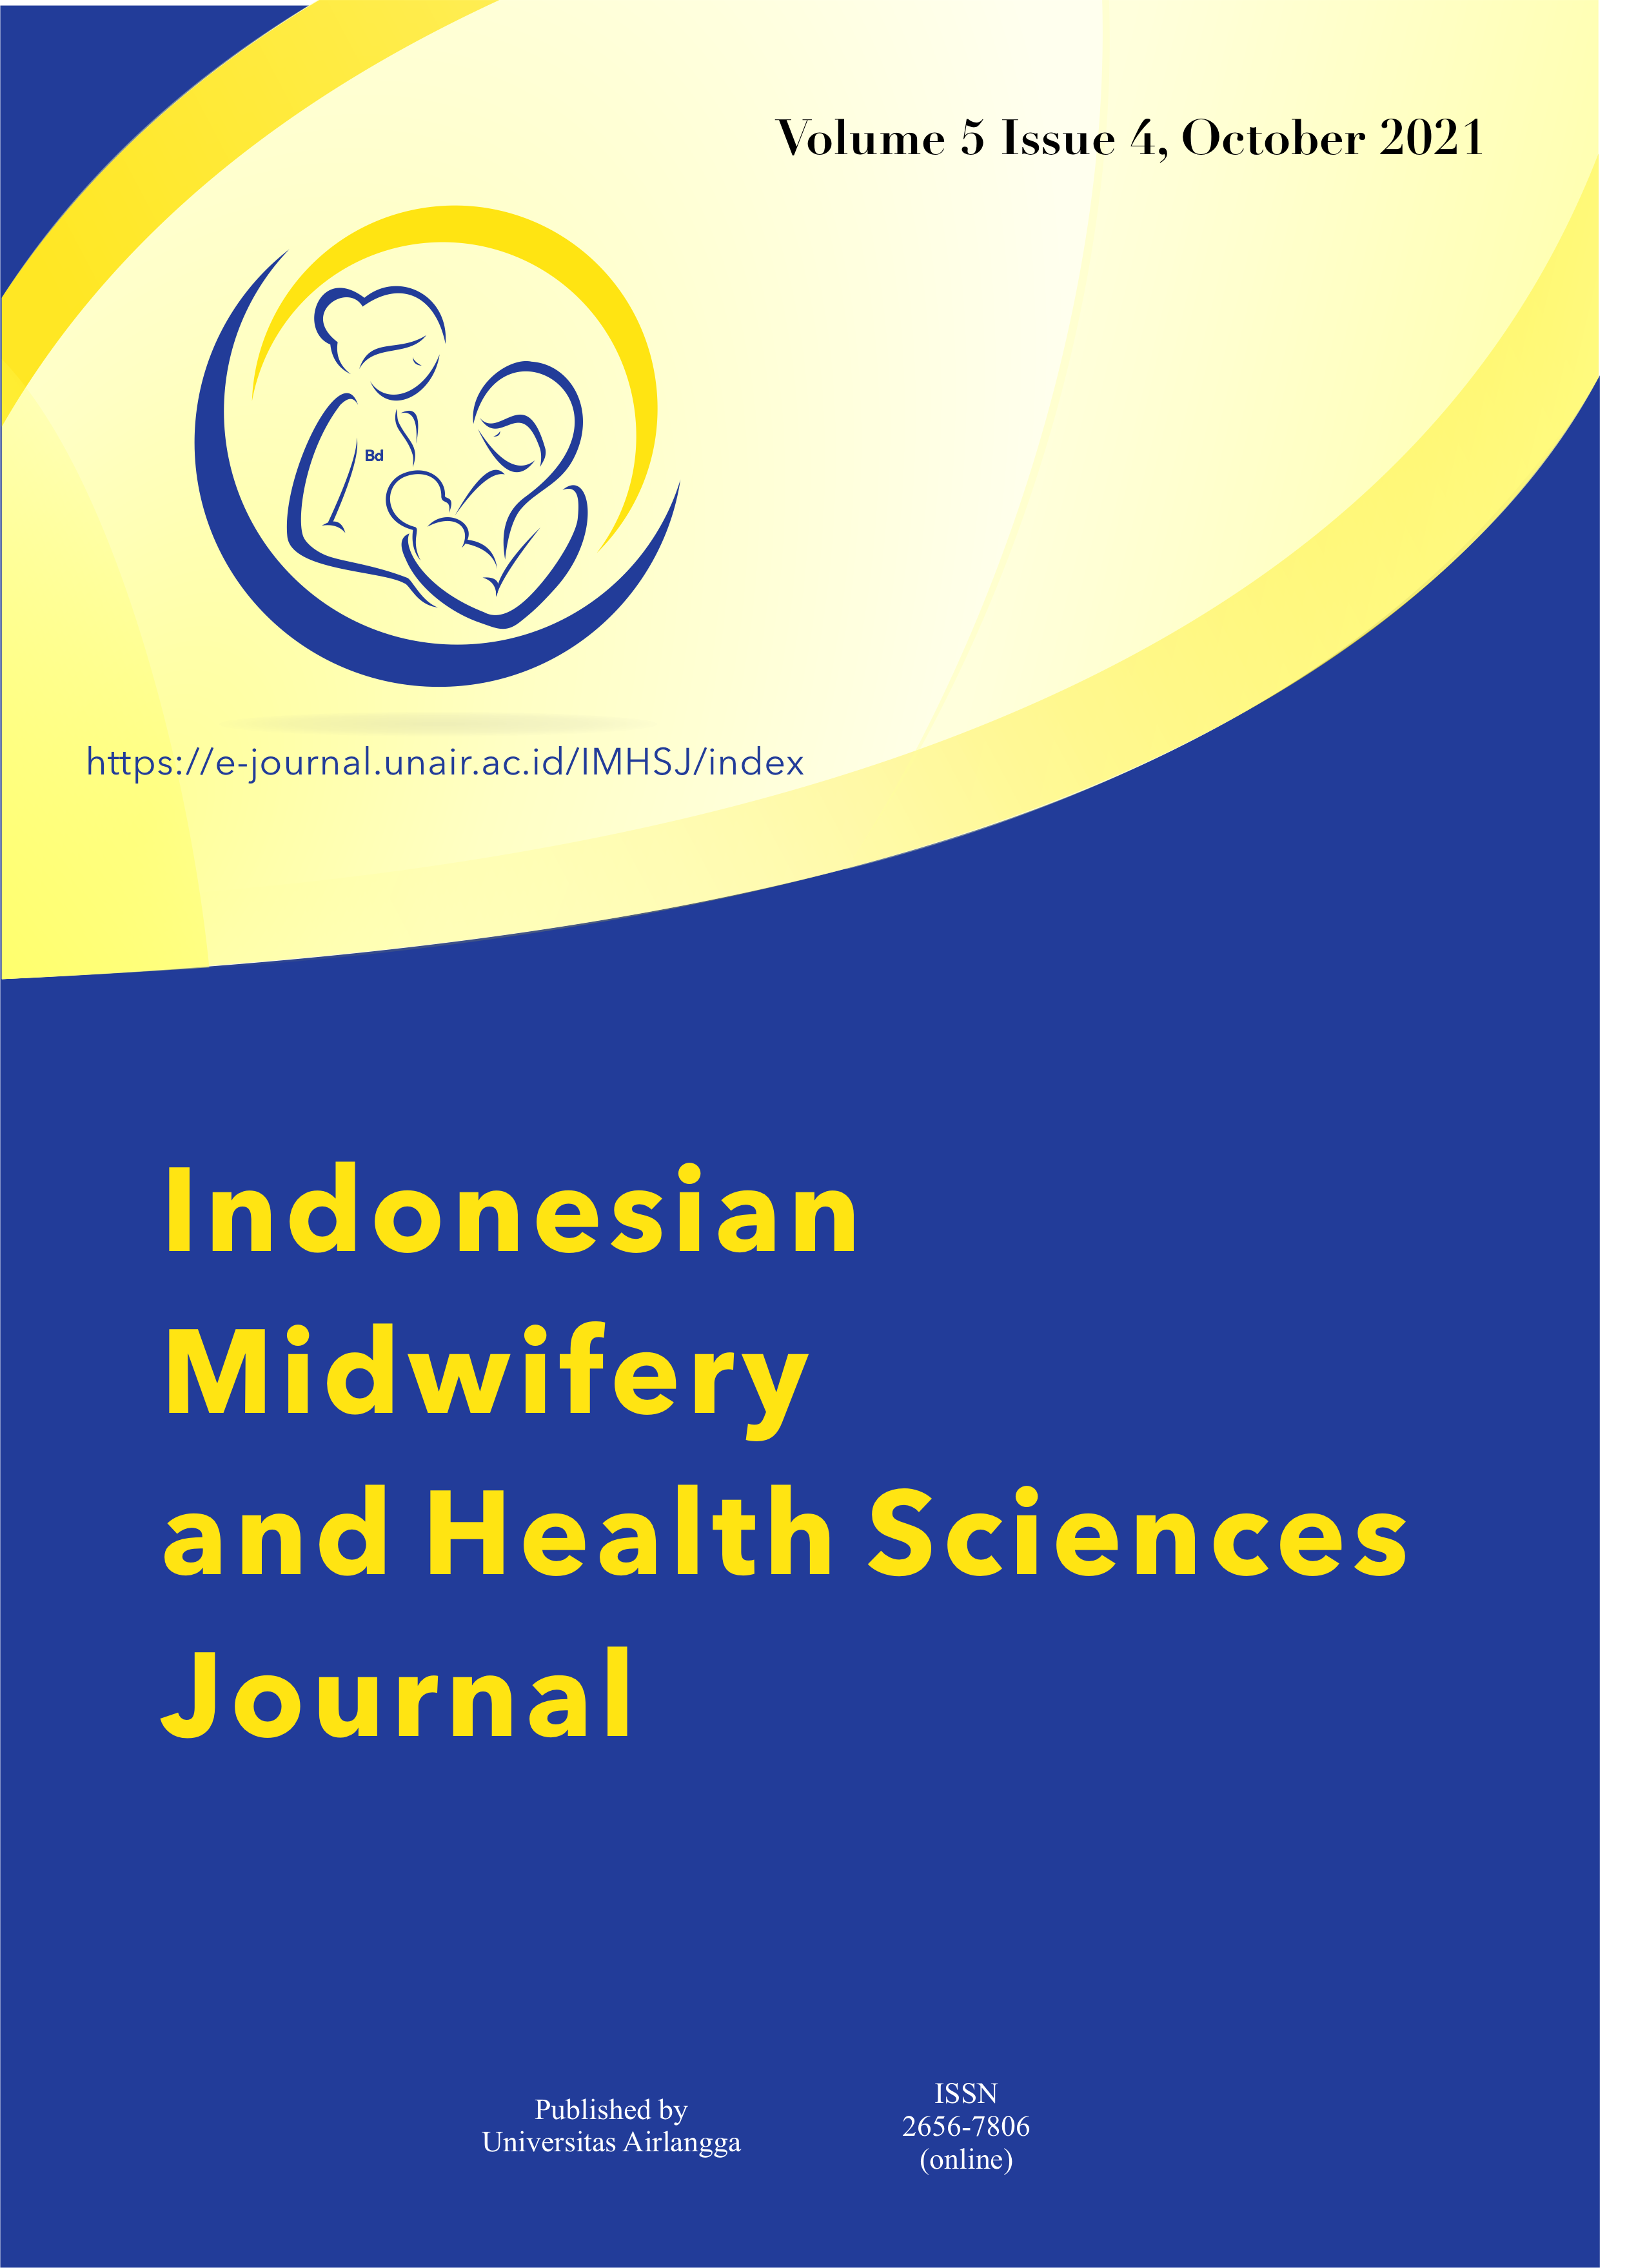 						View Vol. 5 No. 4 (2021): Indonesian Midwifery and Health Sciences Journal, October 2021
					